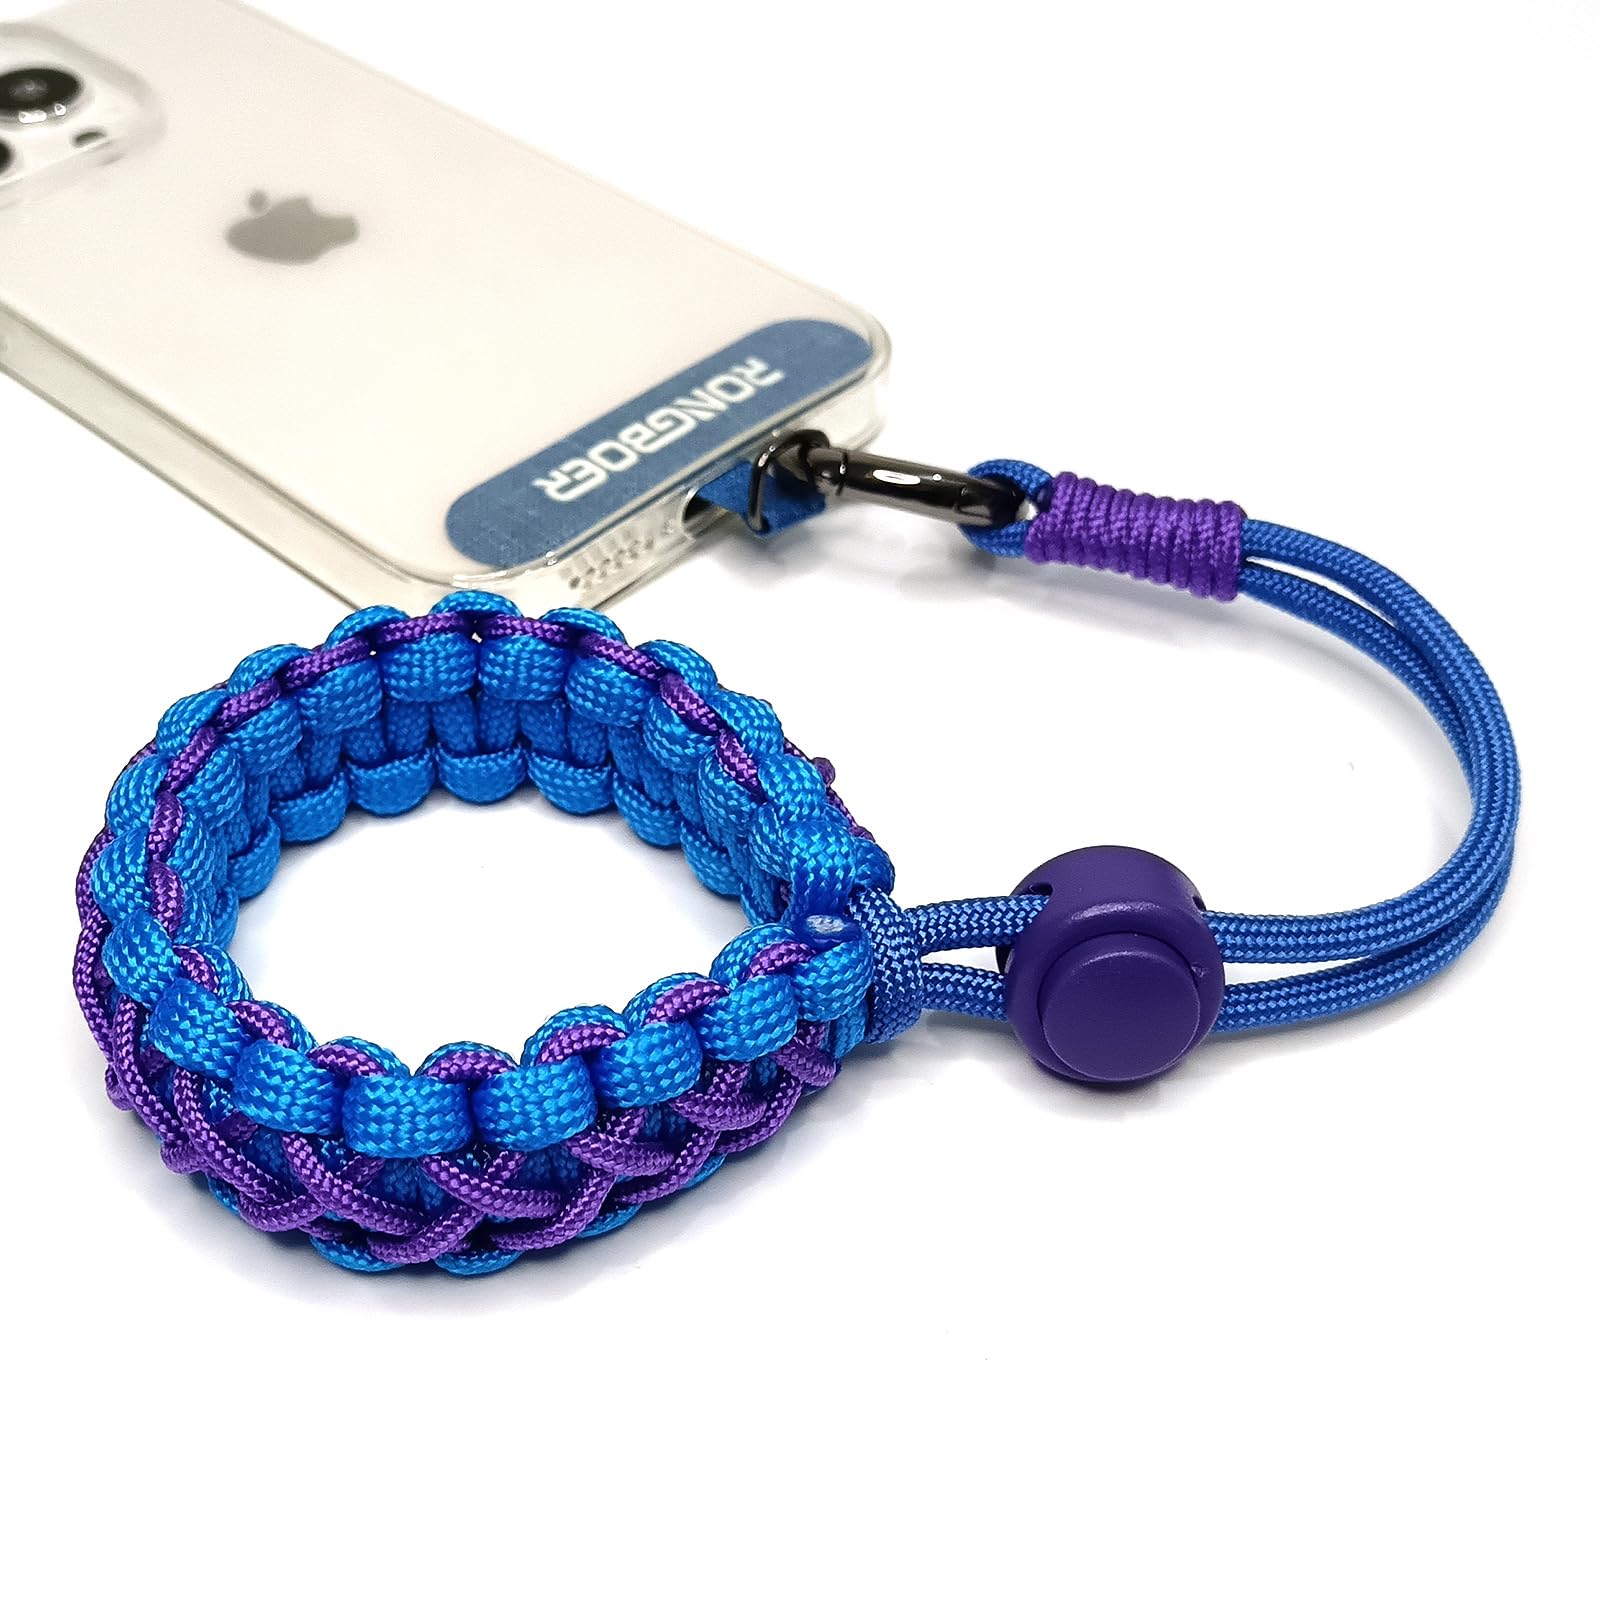 Mobile Phone Paracord Keychains Lanyard